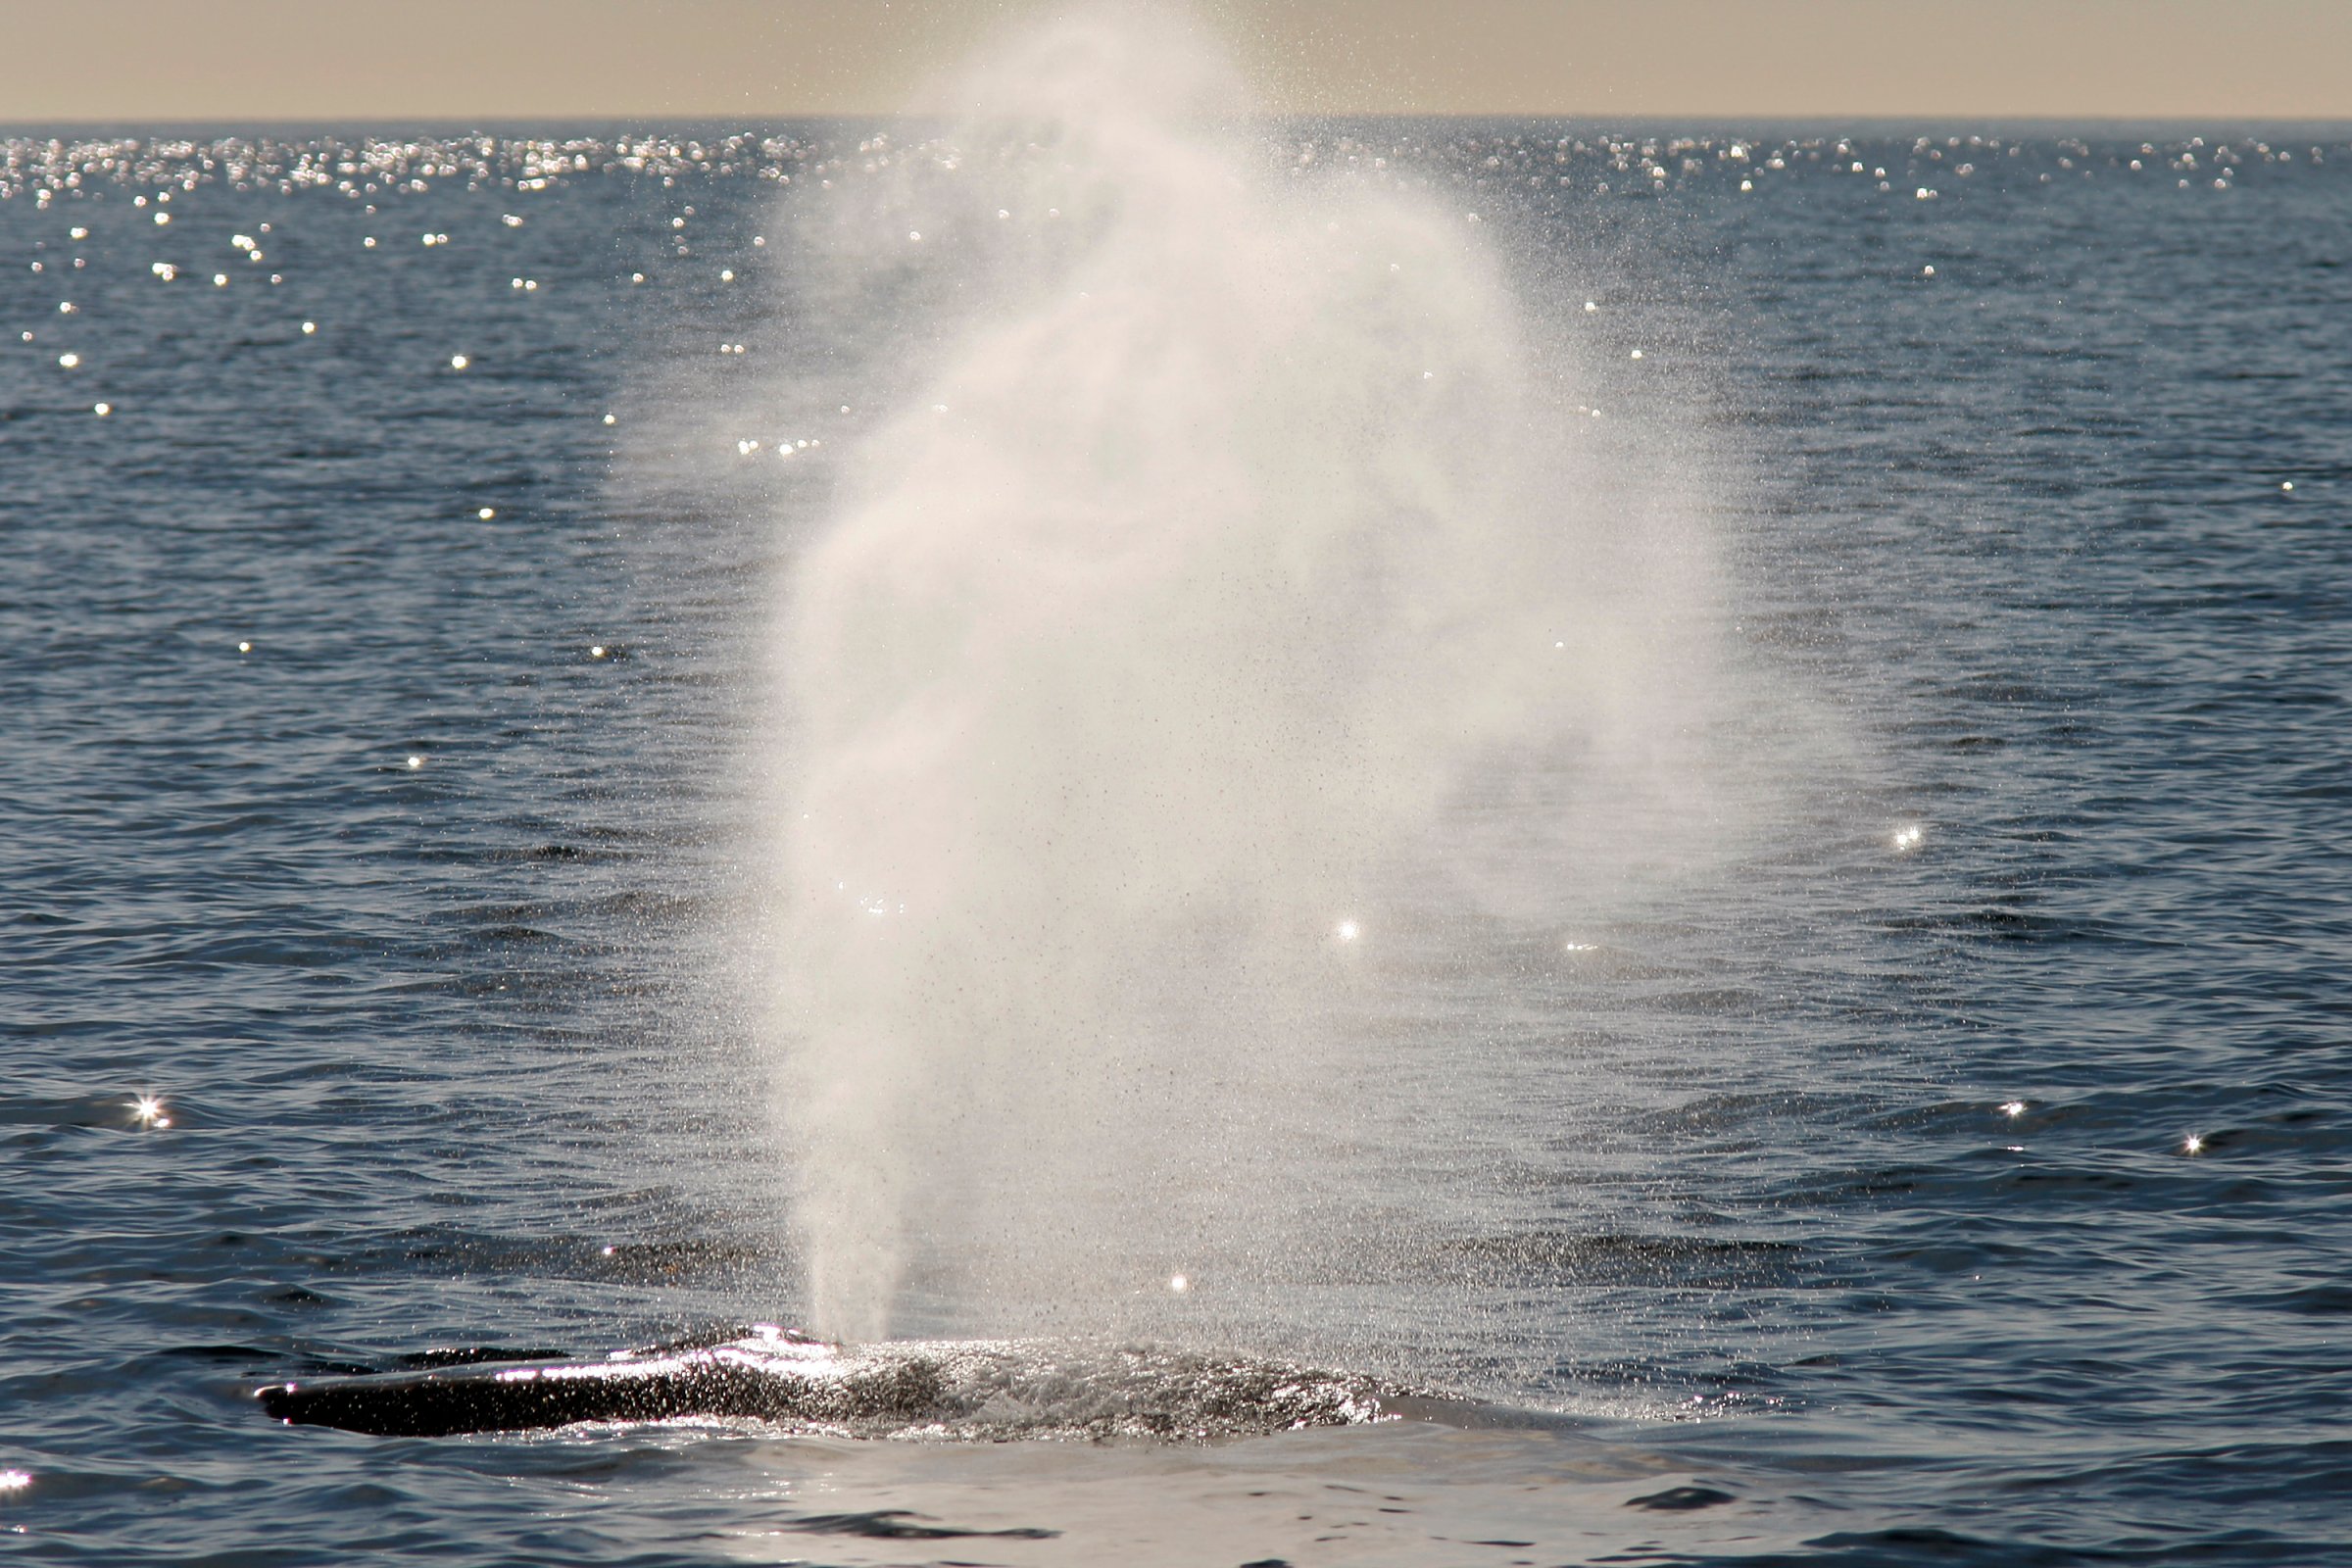 Environmental Groups Challenge Navy's Use Of Sonar In West Coast Training Exercises